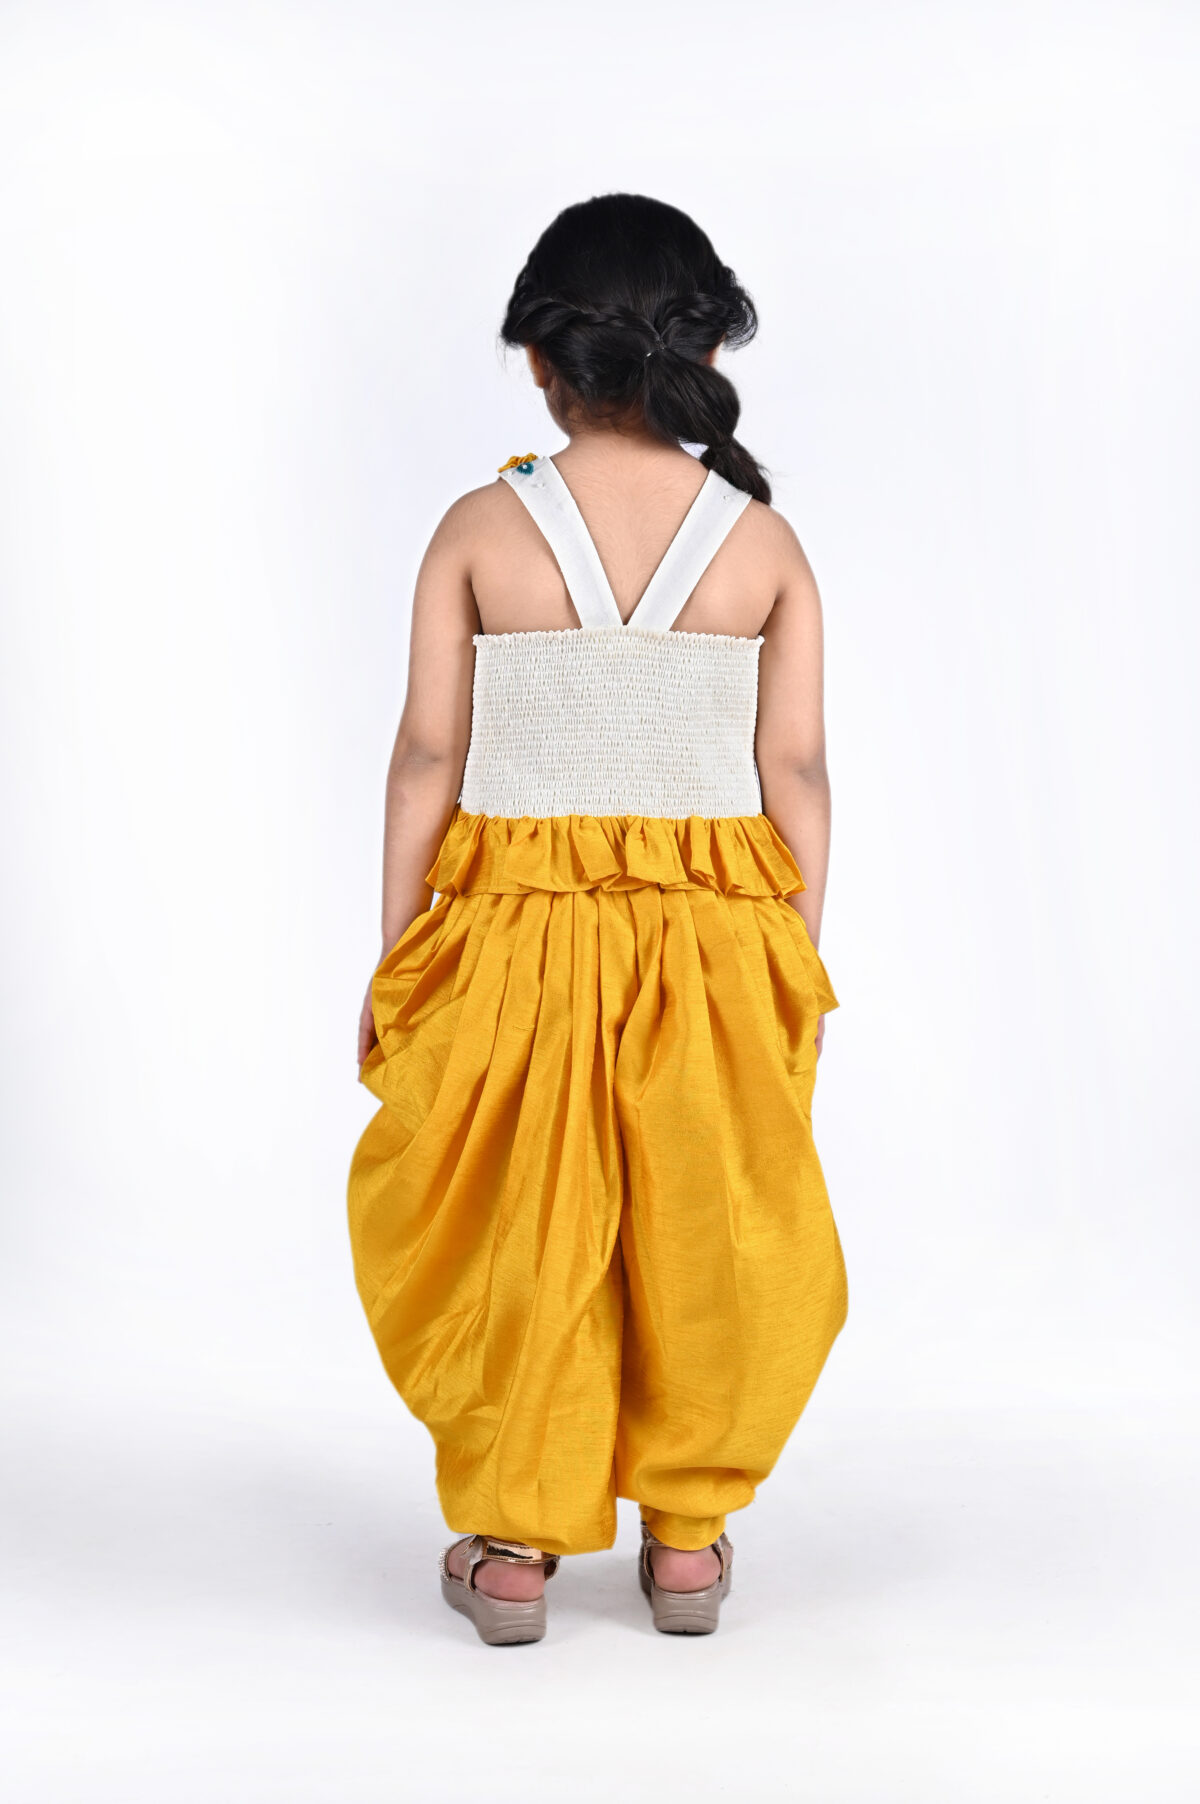 DSC 4720 copy scaled Criss Cross Style Top With Dhoti- Yellow & White